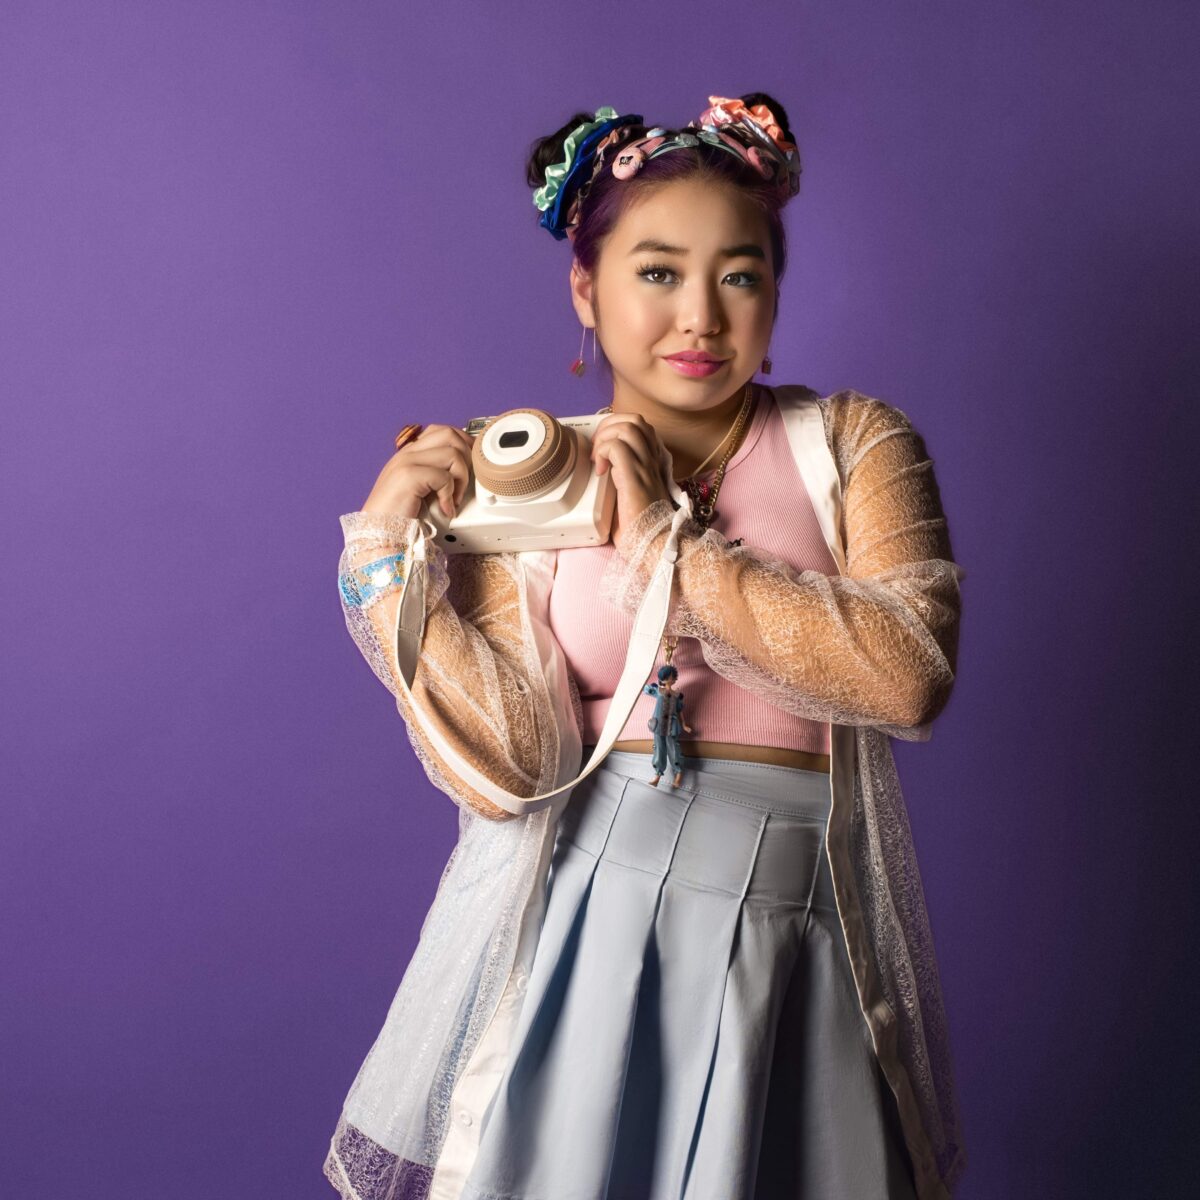 Toronto’s Teen Prodigy Sydney <3 Sparks Musical Revolution With K-Pop Elegance In ‘Picture Perfect’